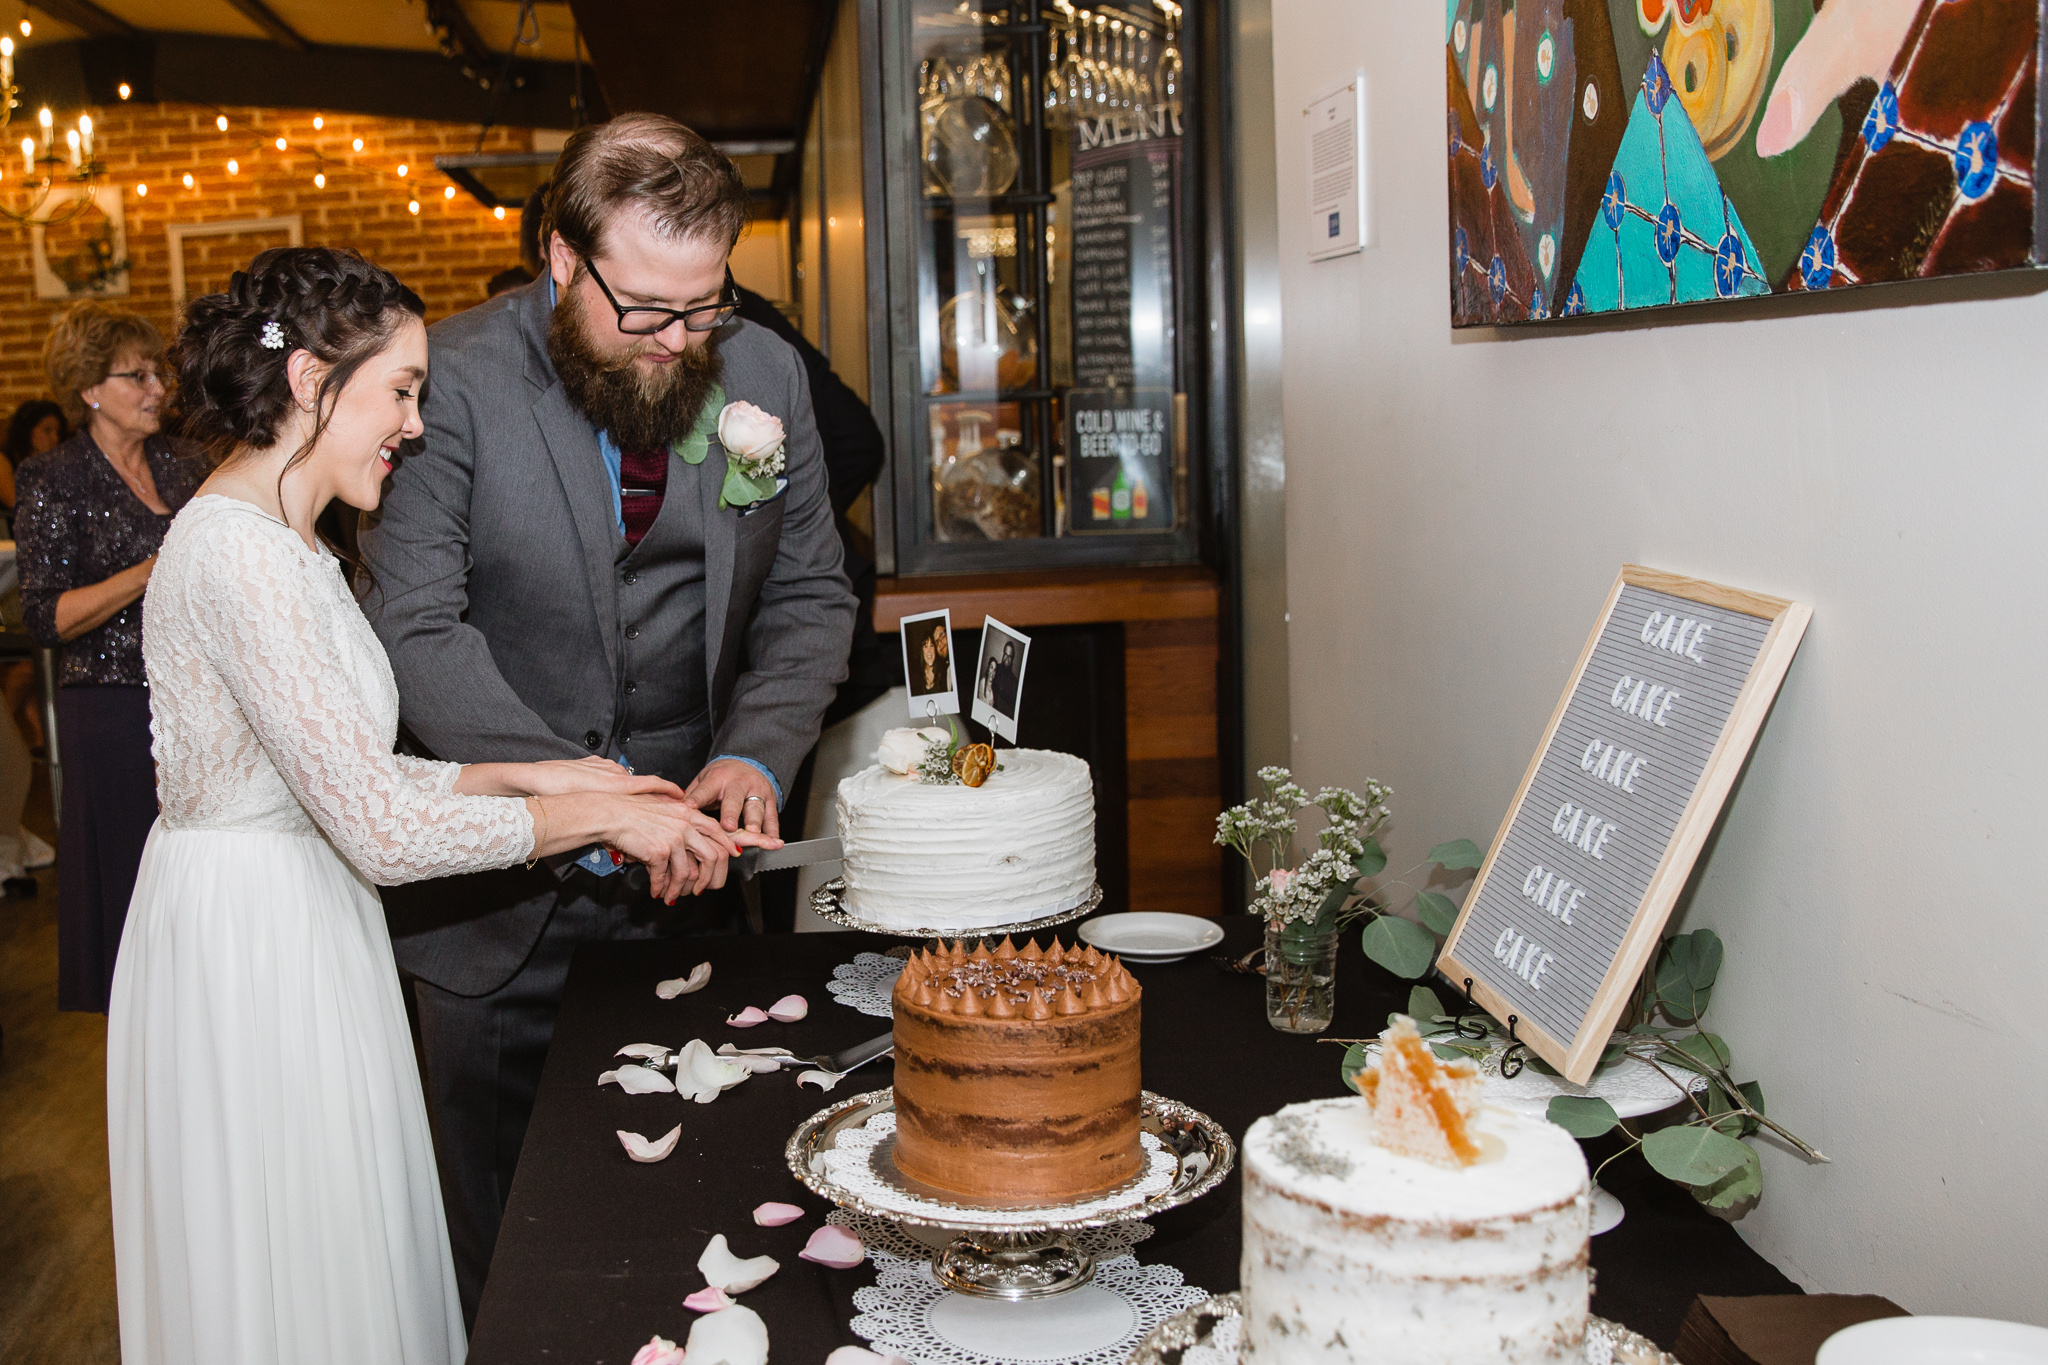 Bride and groom cutting their vintage wedding cake at their wedding reception at The Newton in Phoenix, Arizona.